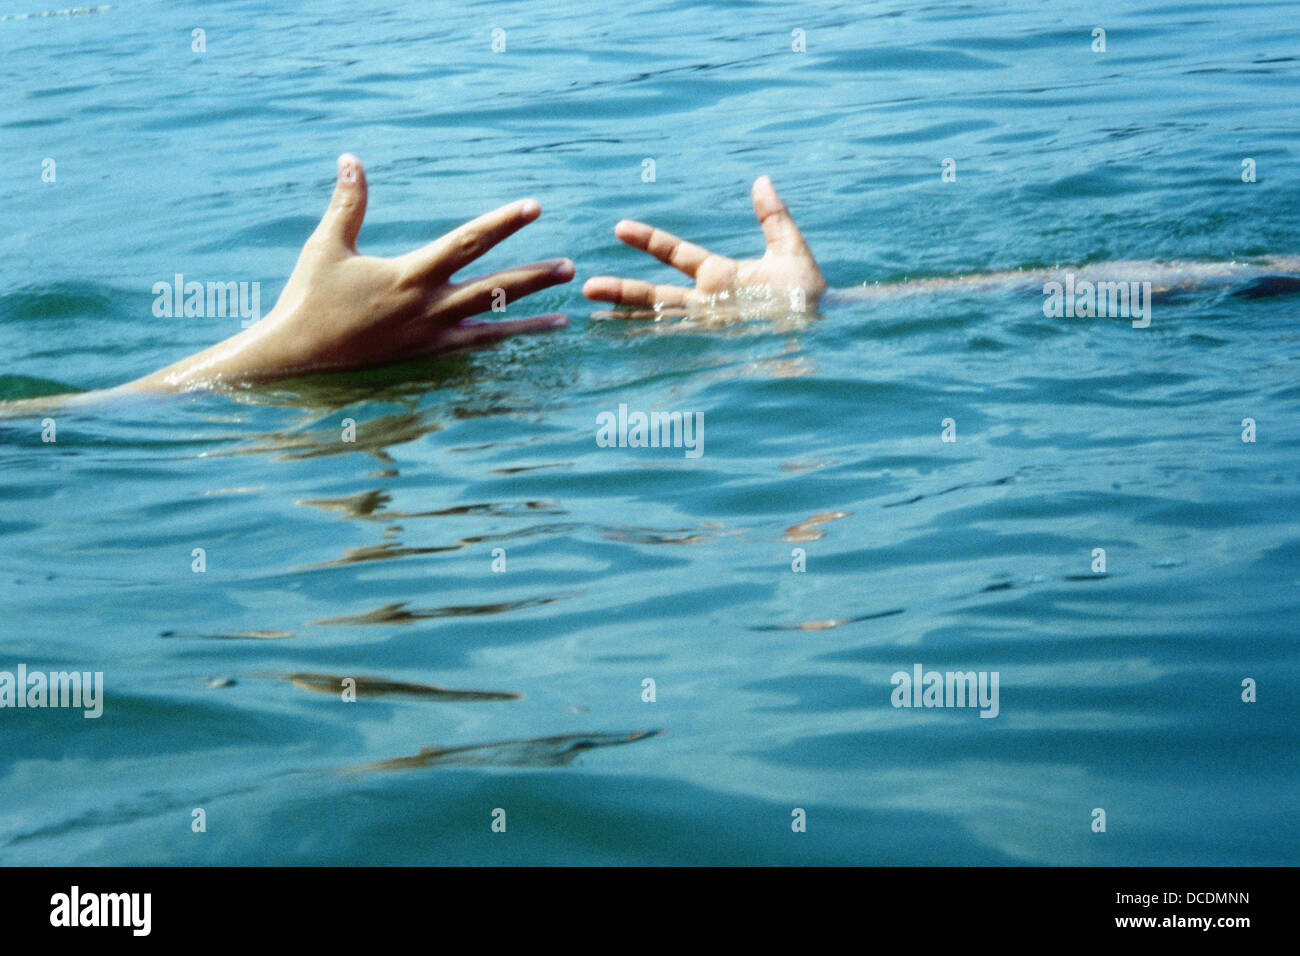 People Drowning Stock Photos & People Drowning Stock Images - Alamy